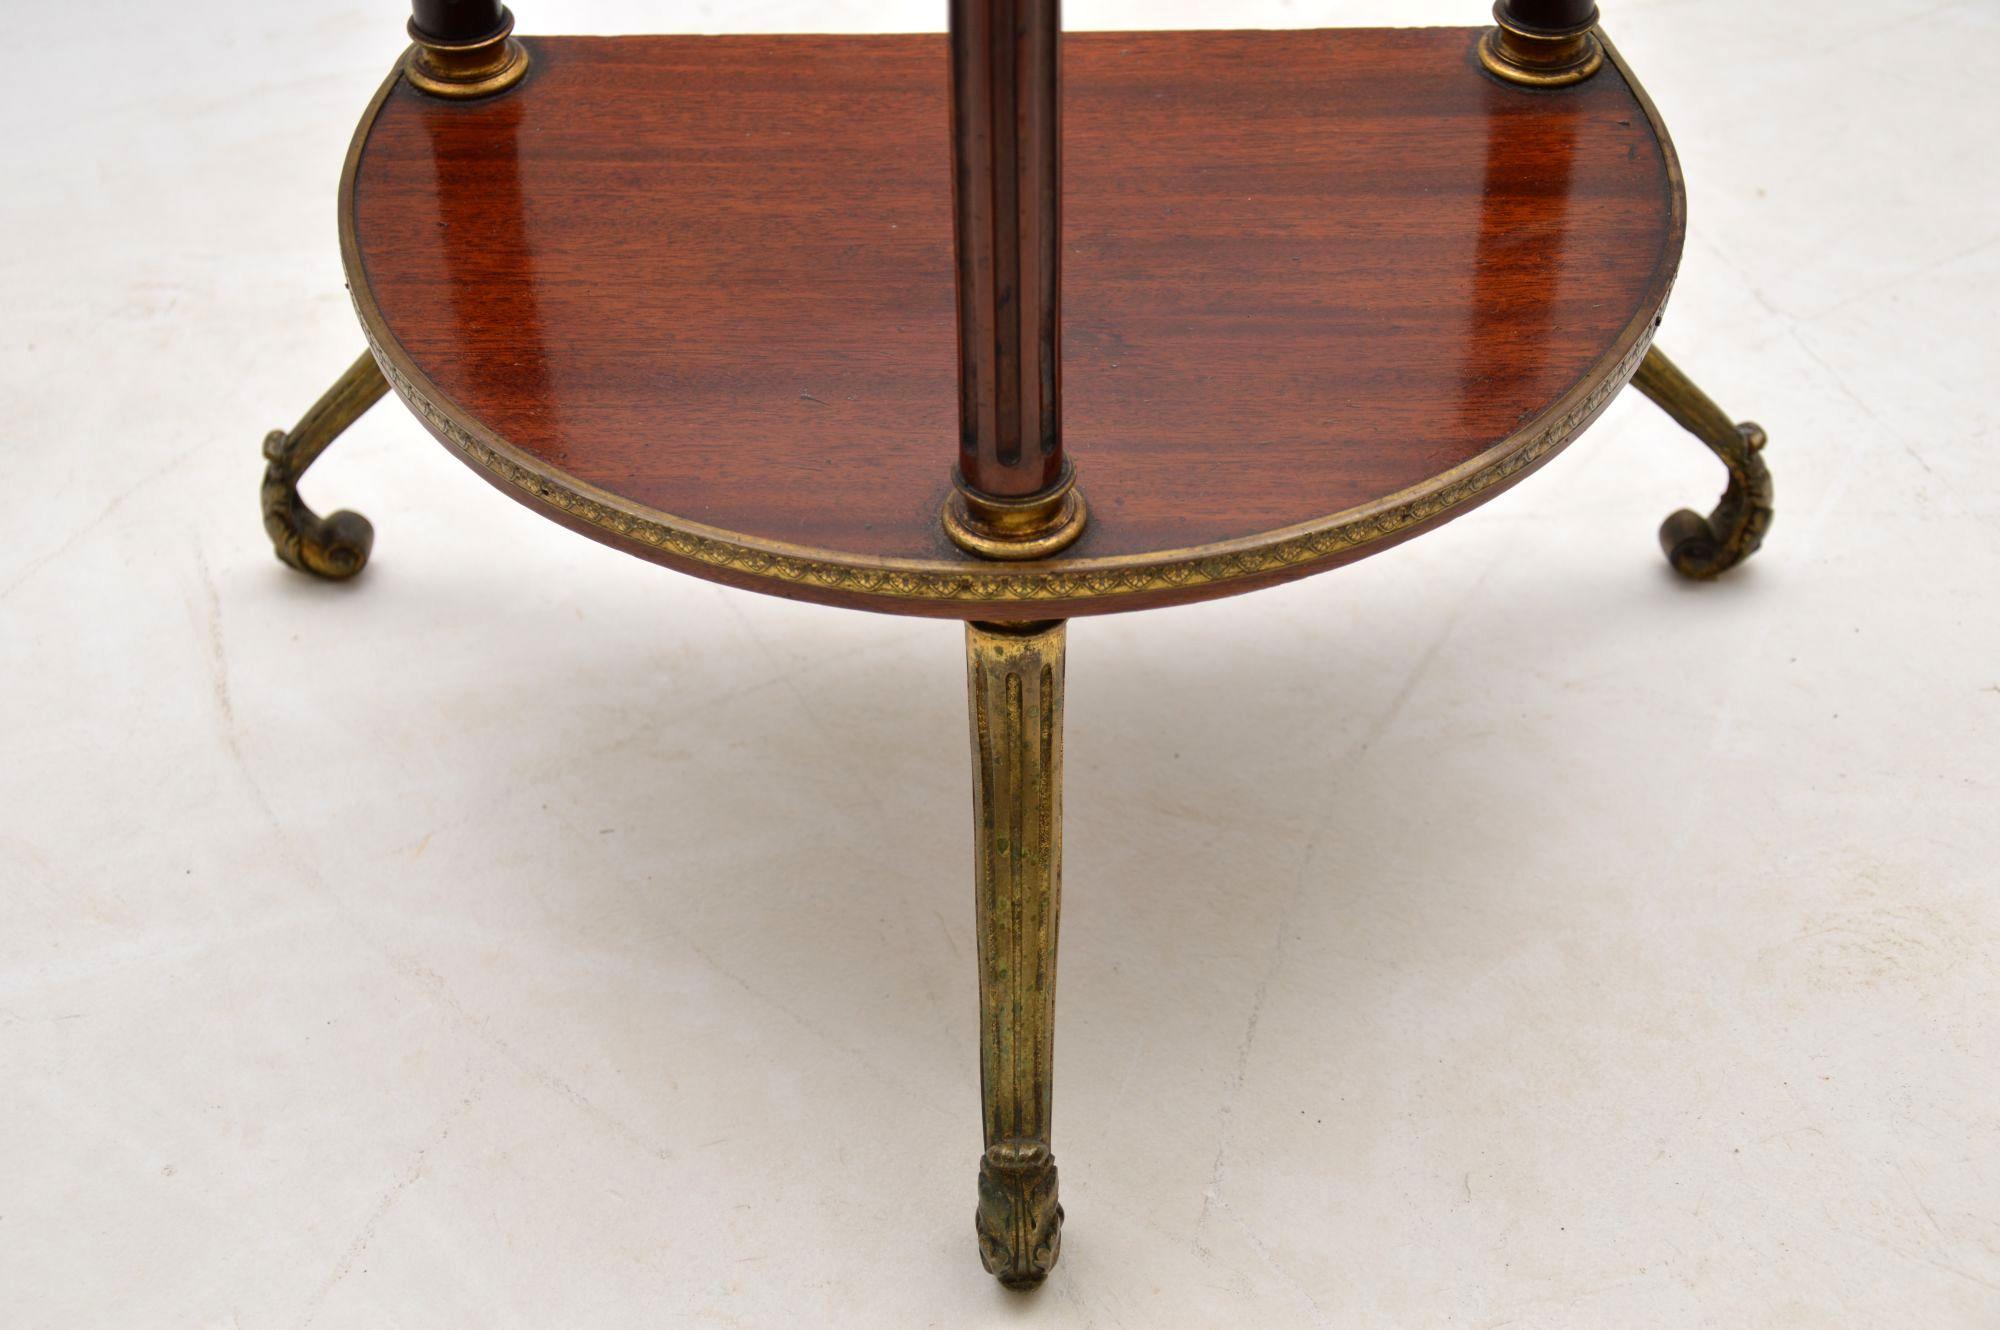 Nicely designed French antique mahogany two-tiered side table or stand. In fact some might call this an étagère. The two levels have brass edgings and the brass legs are very decorative. The three columns in the middle are fluted. I would date this